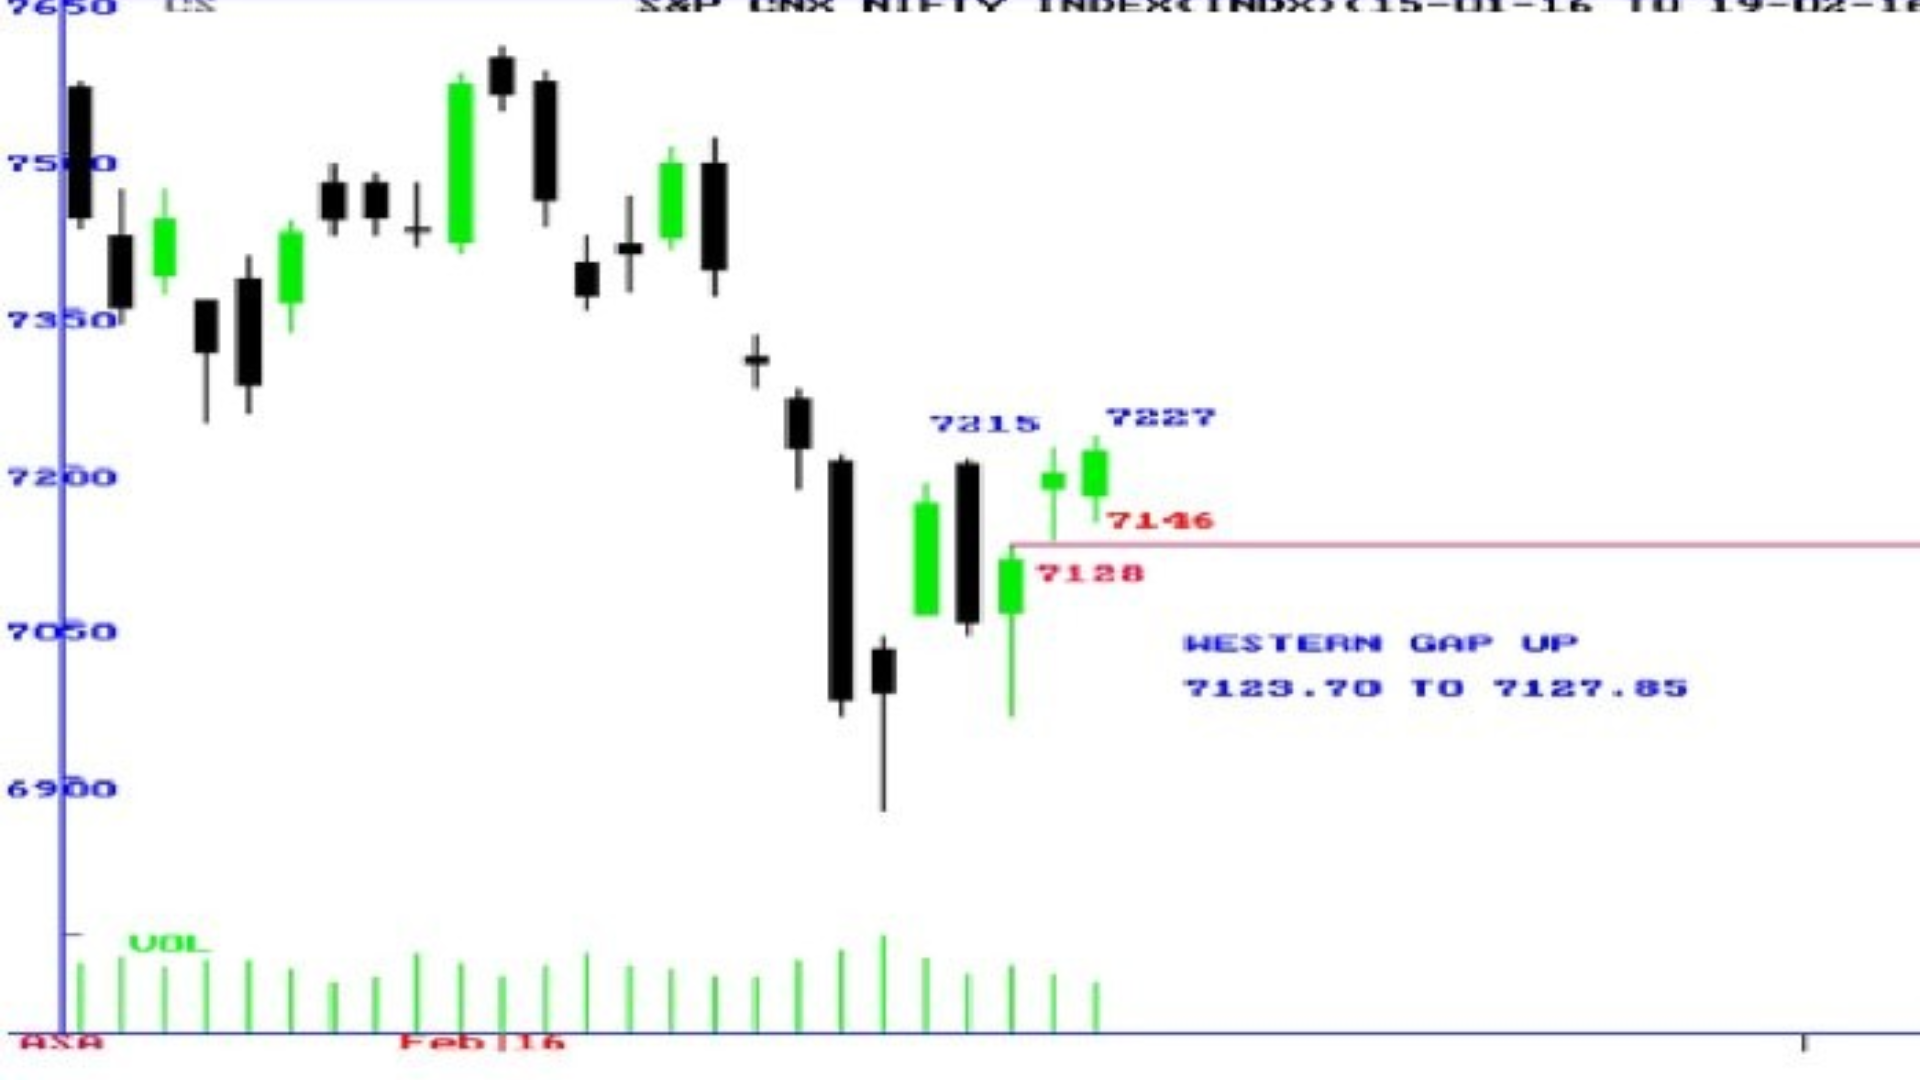 Nifty Experiences Gap Down, Fills the Gap, and Breaks Below 22,600 Mark, Signaling Potential Top Formation